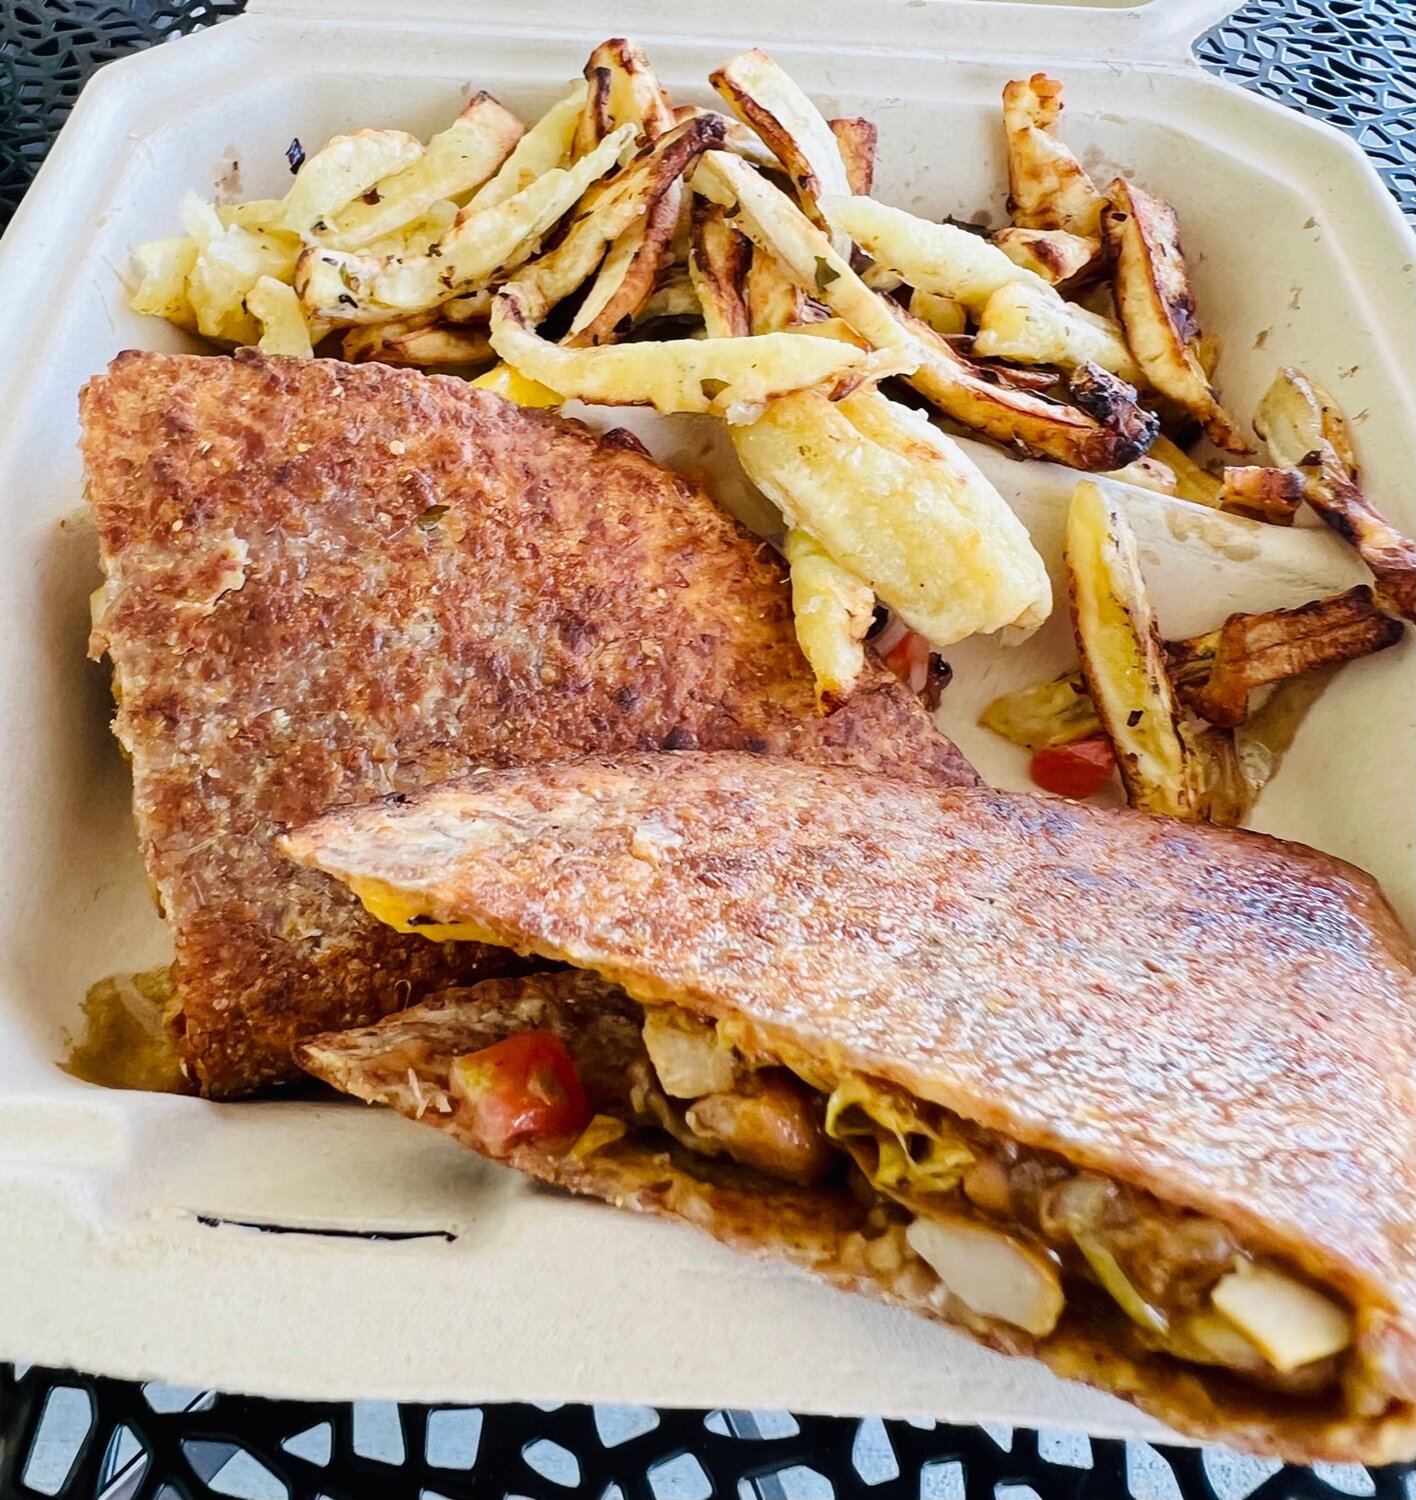 The Caribbean-inspired jackfruit quesadillas come with a side of burro banana fries at Earthhouse in Westwood Shopping Center.